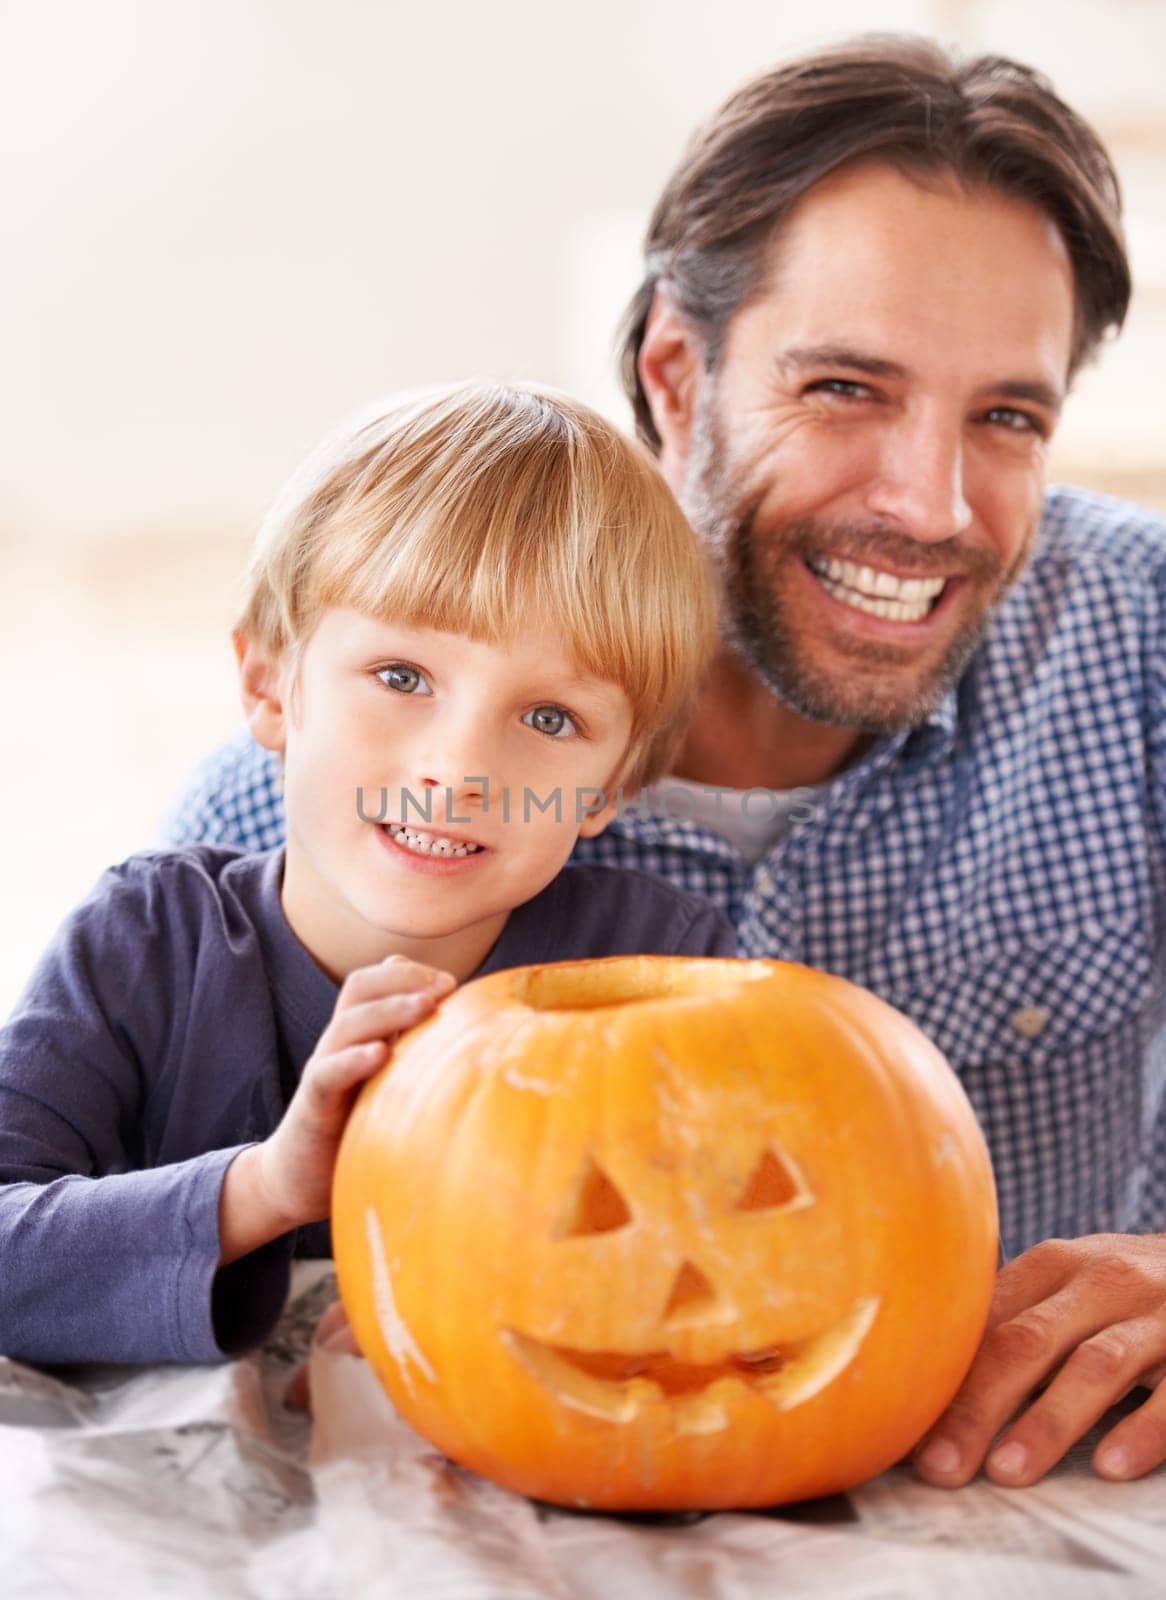 Proud of their jack-o-lantern. Portrait of a father and son behind their carved pumpkin for halloween